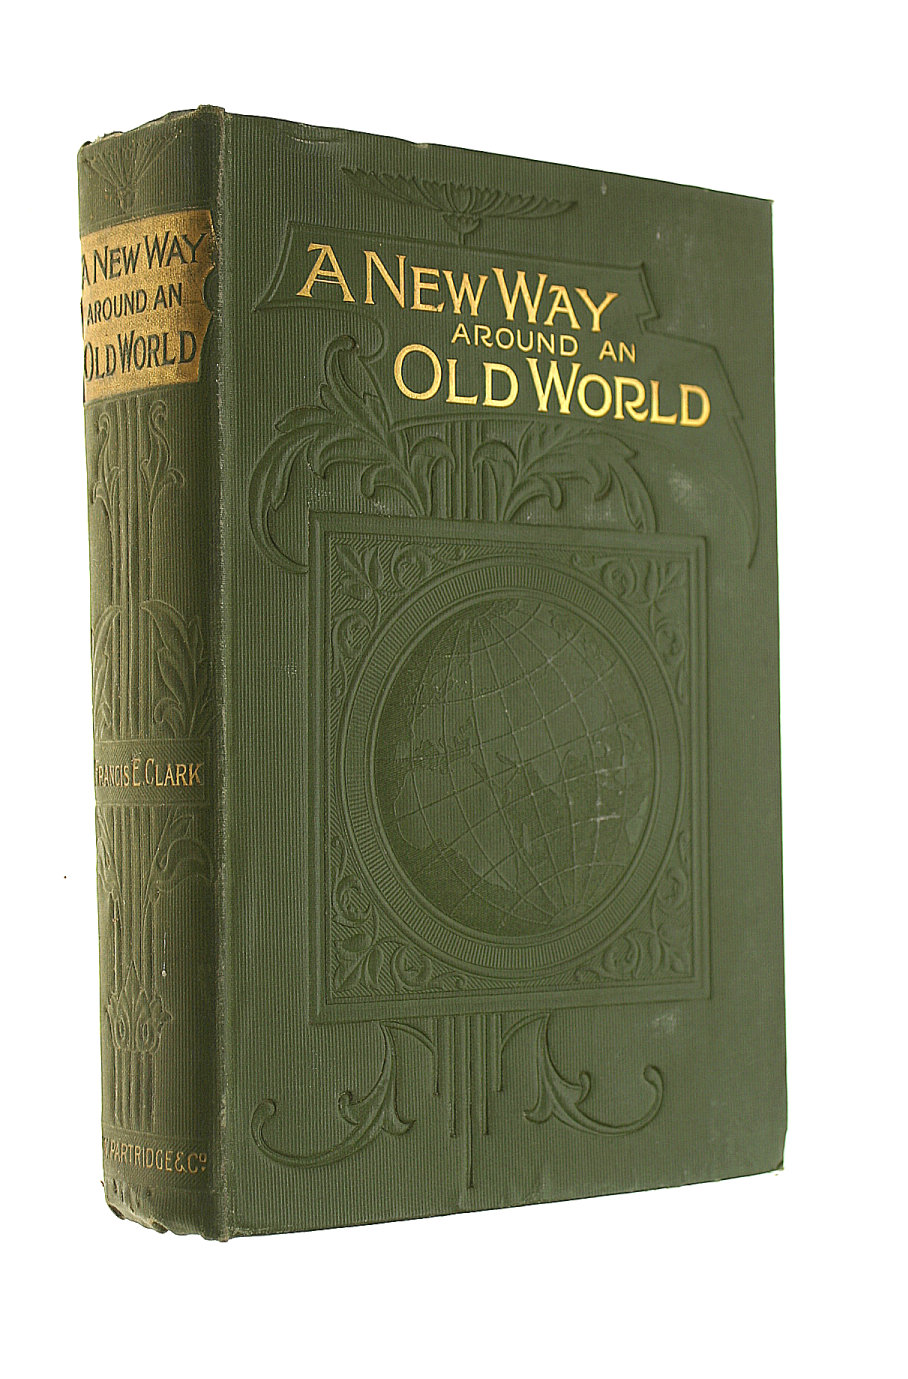 CLARKE, FRANCIS E. - A New Way Around An Old World.